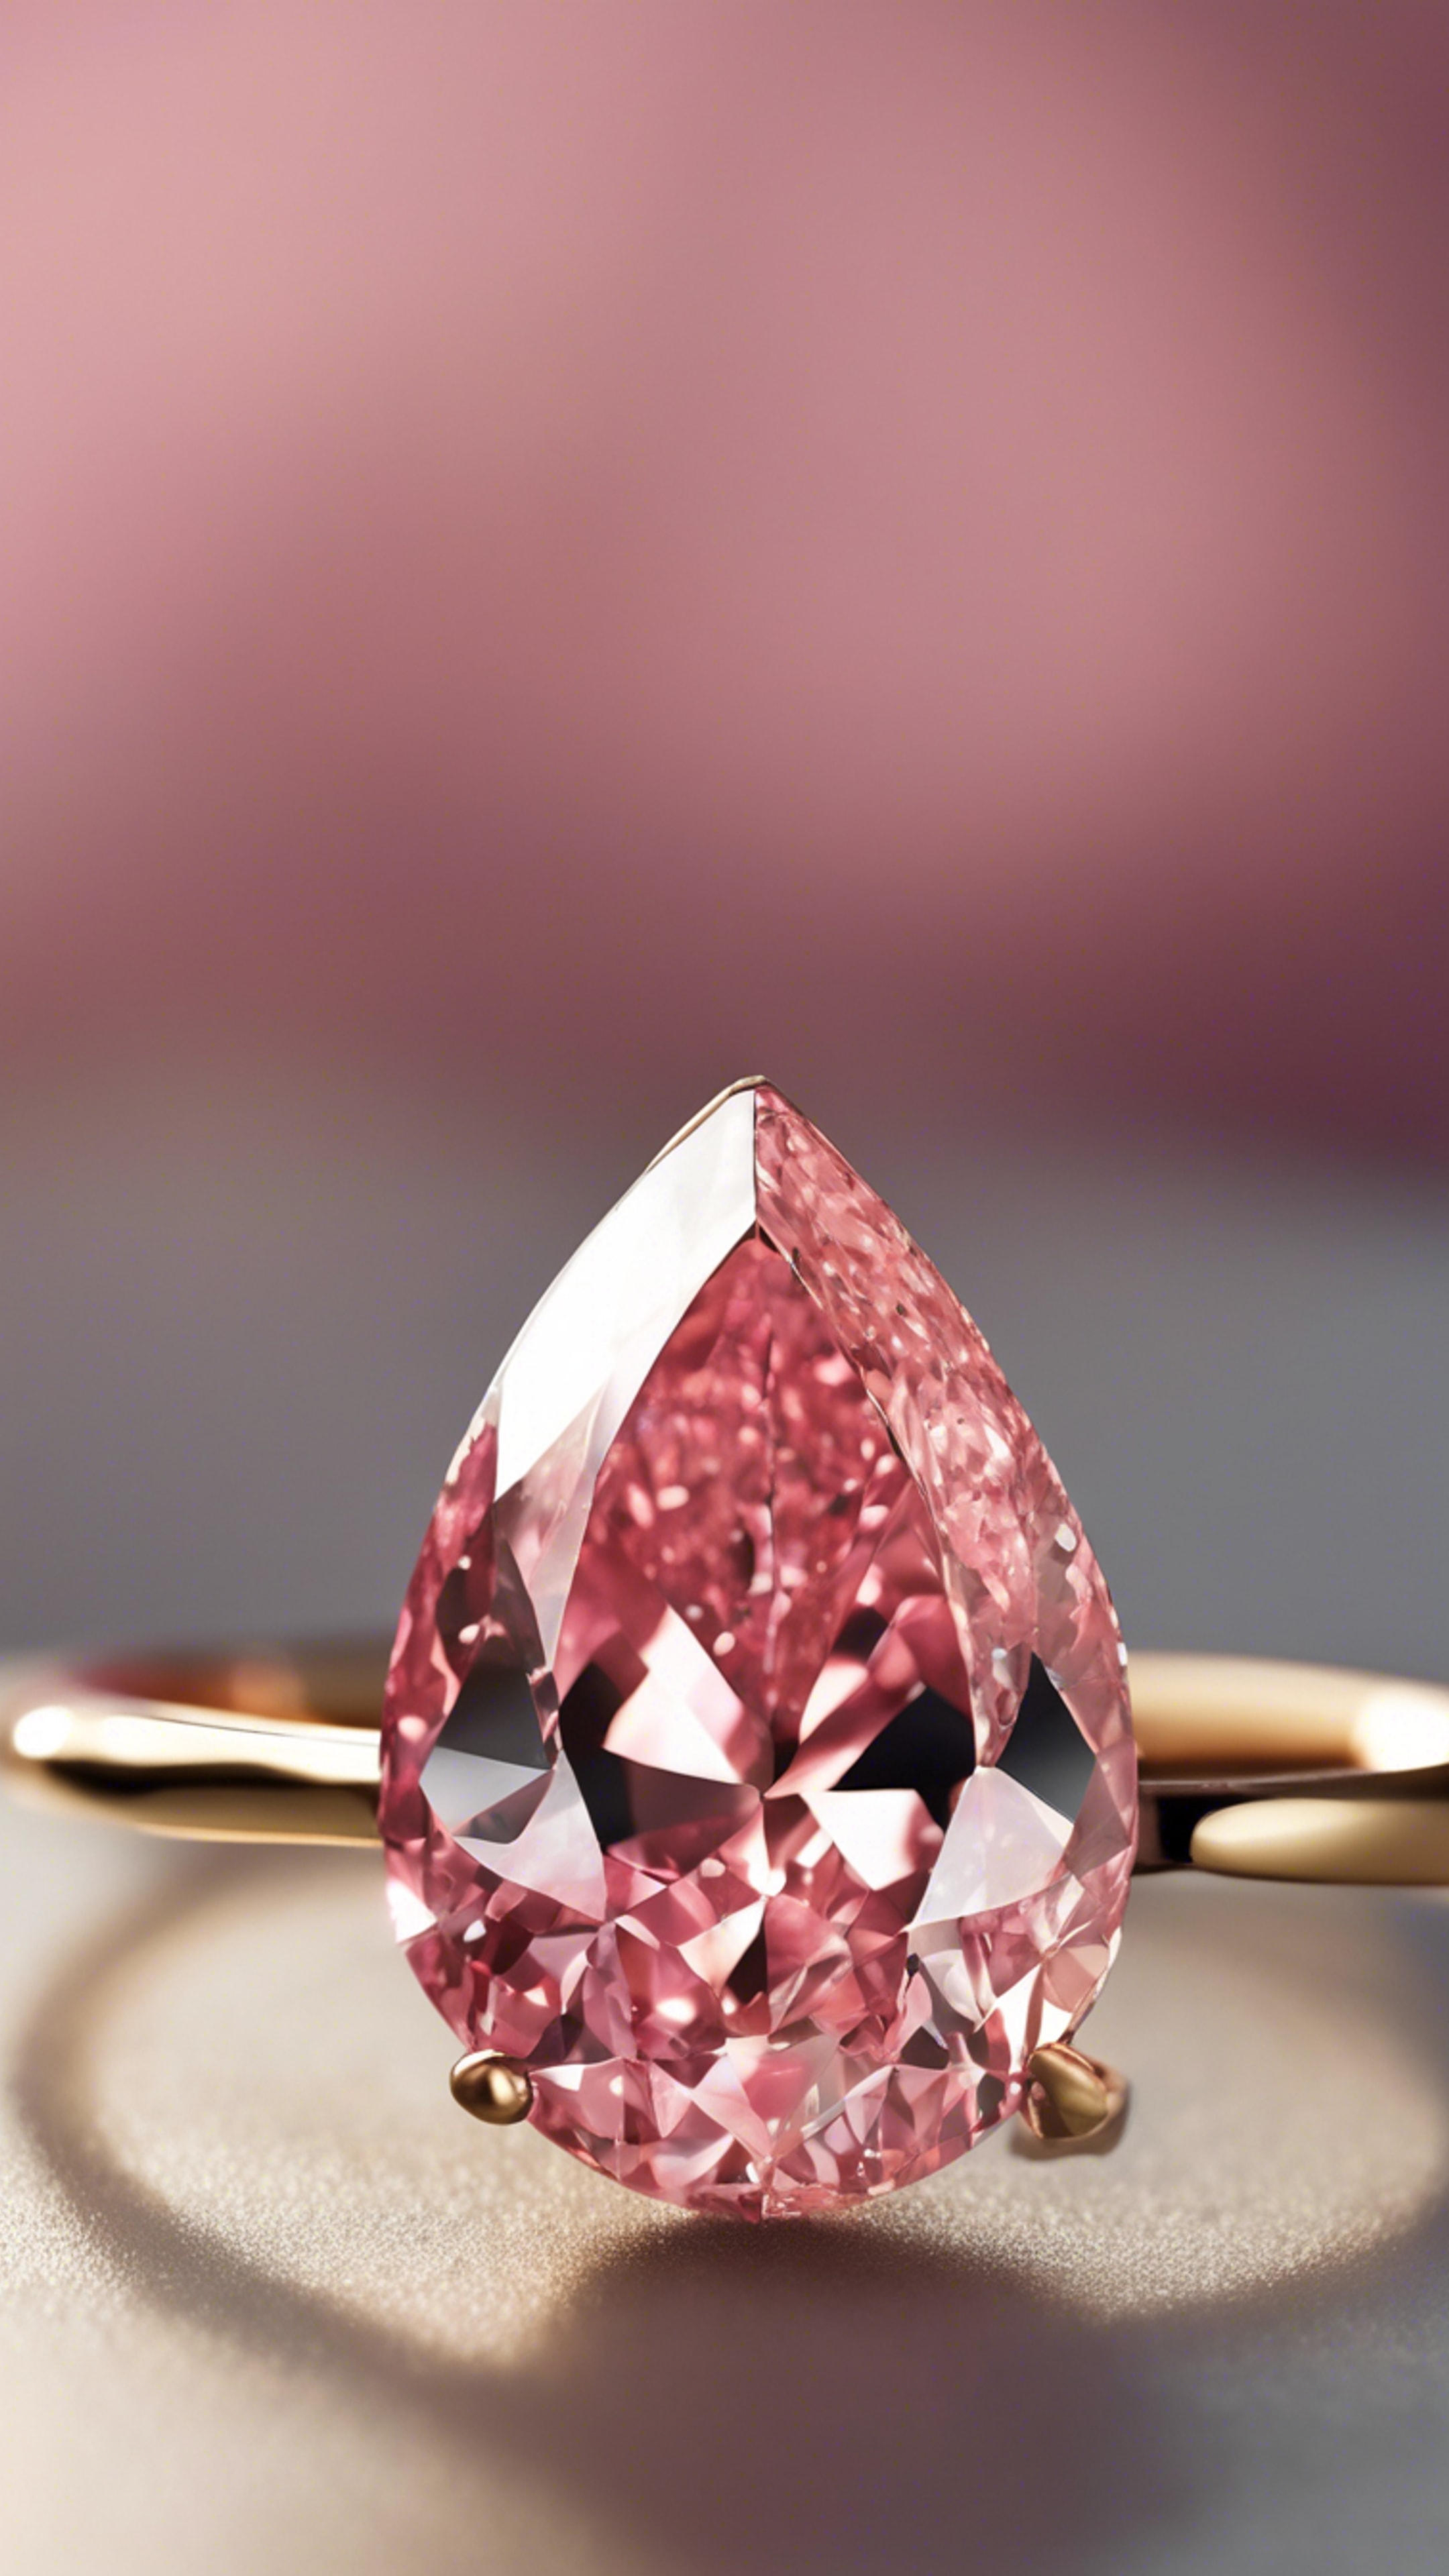 A close-up of a pink pear-shaped diamond on a simple gold band. 牆紙[930f75676b4b4a58983f]